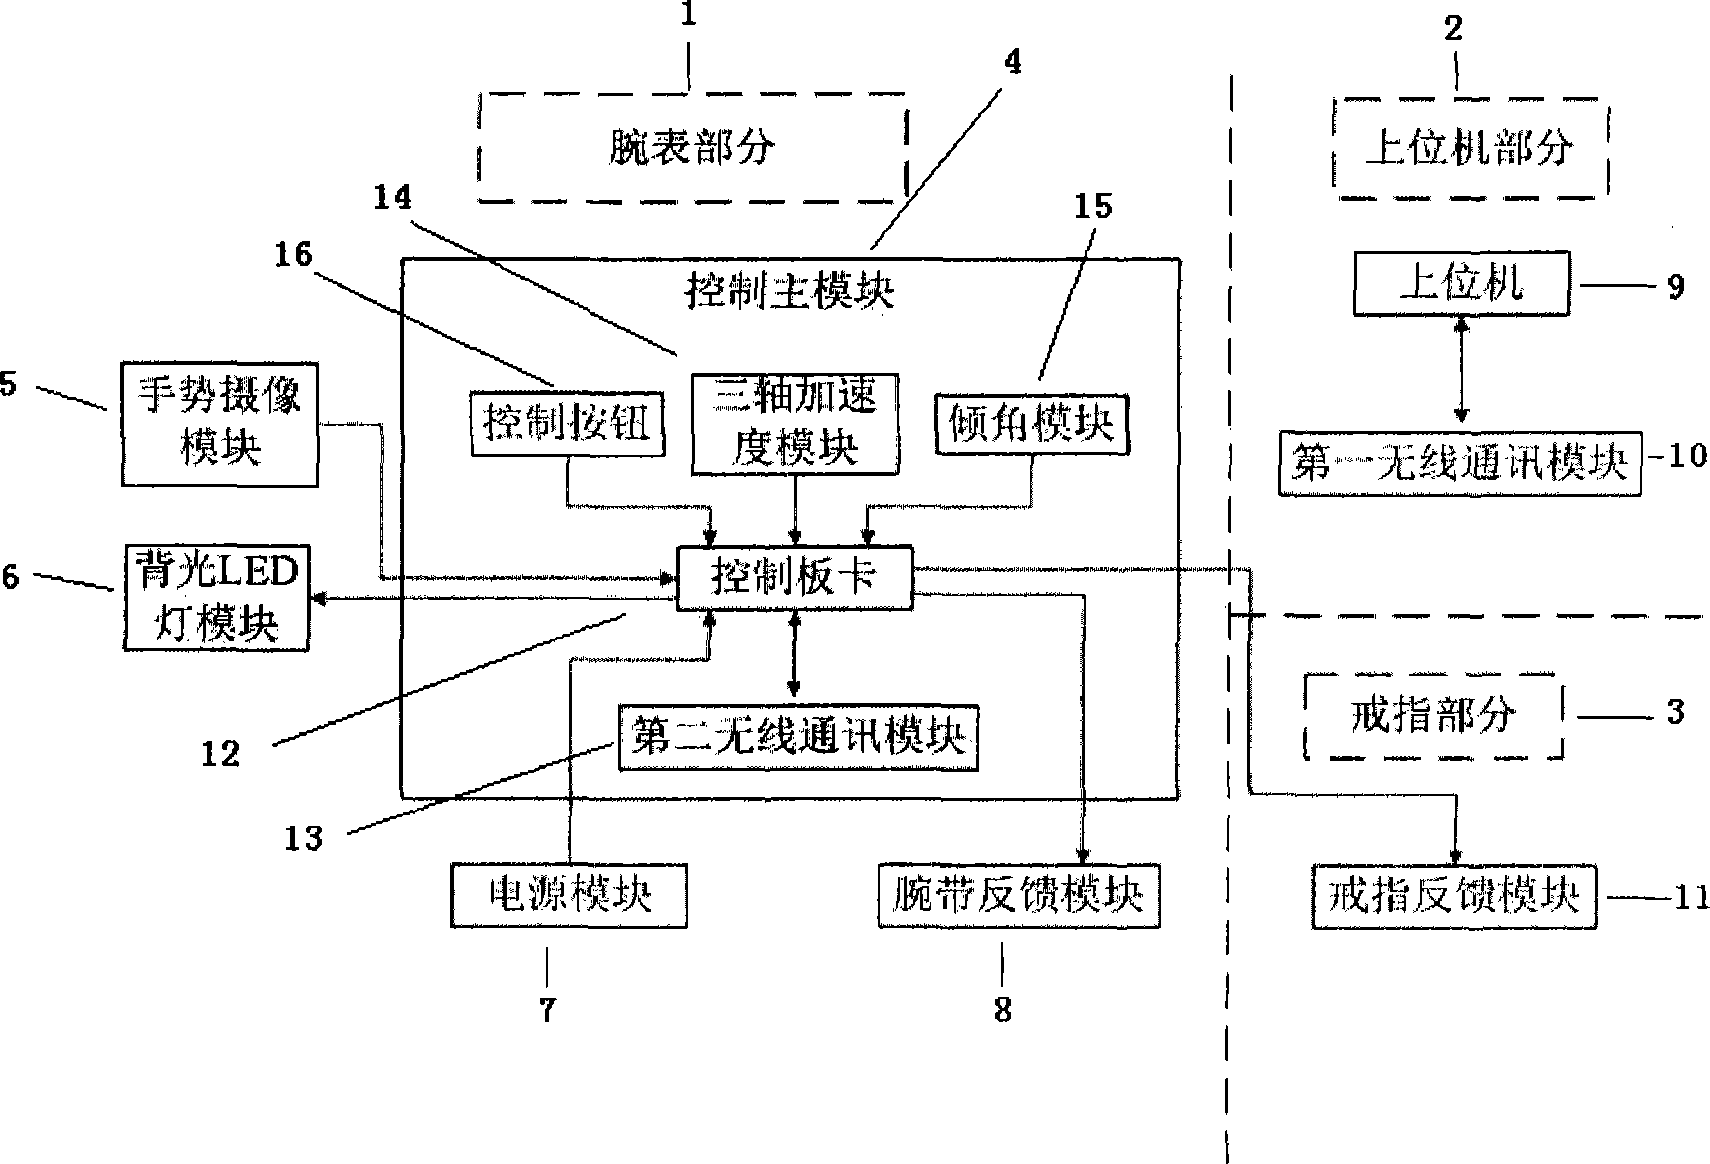 Wrist gesture control system and method